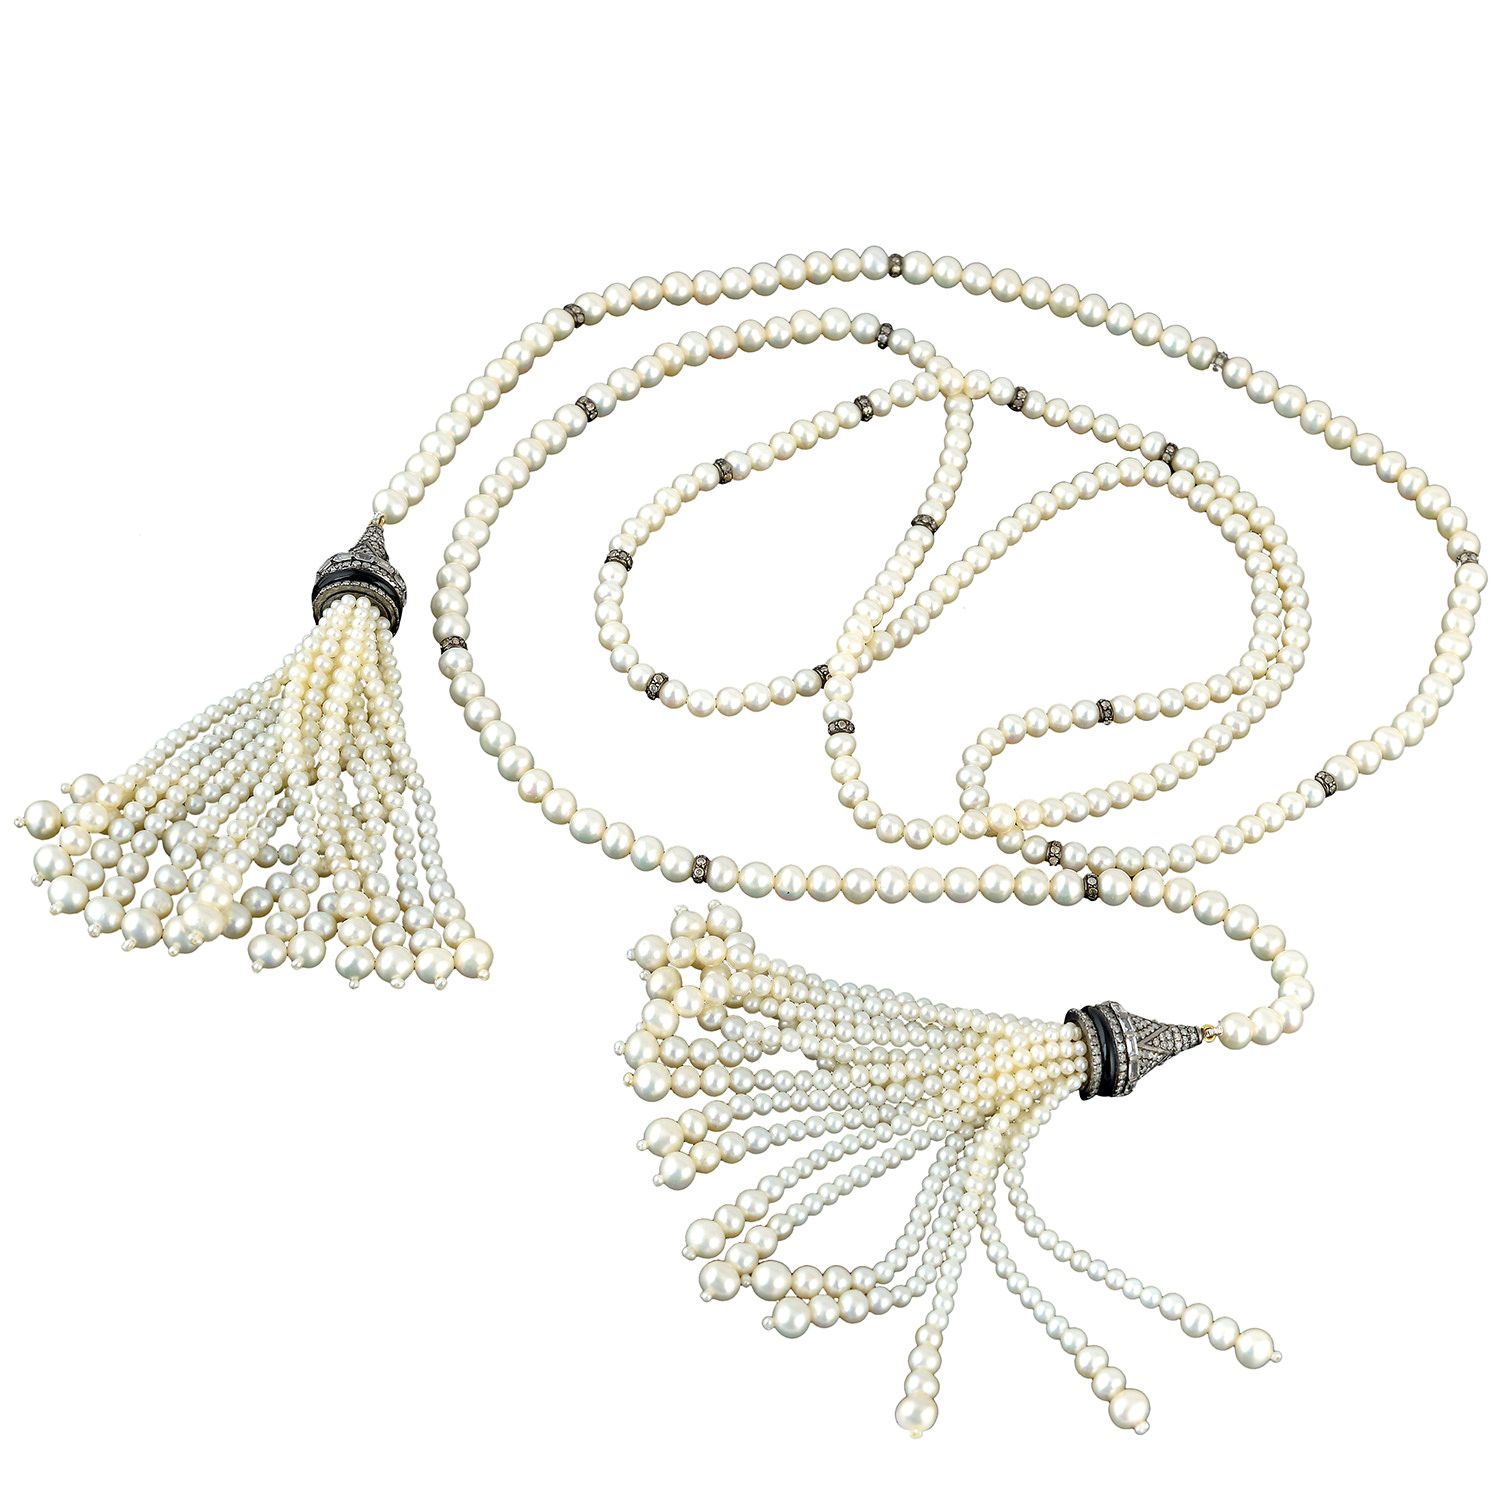 Details About Pave Diamond Sapphire Onyx Pearl Beads 18k Gold Rope/lariat  Necklace 925 Silver With 2019 Lariat Sapphire And Diamond Necklaces (View 15 of 25)